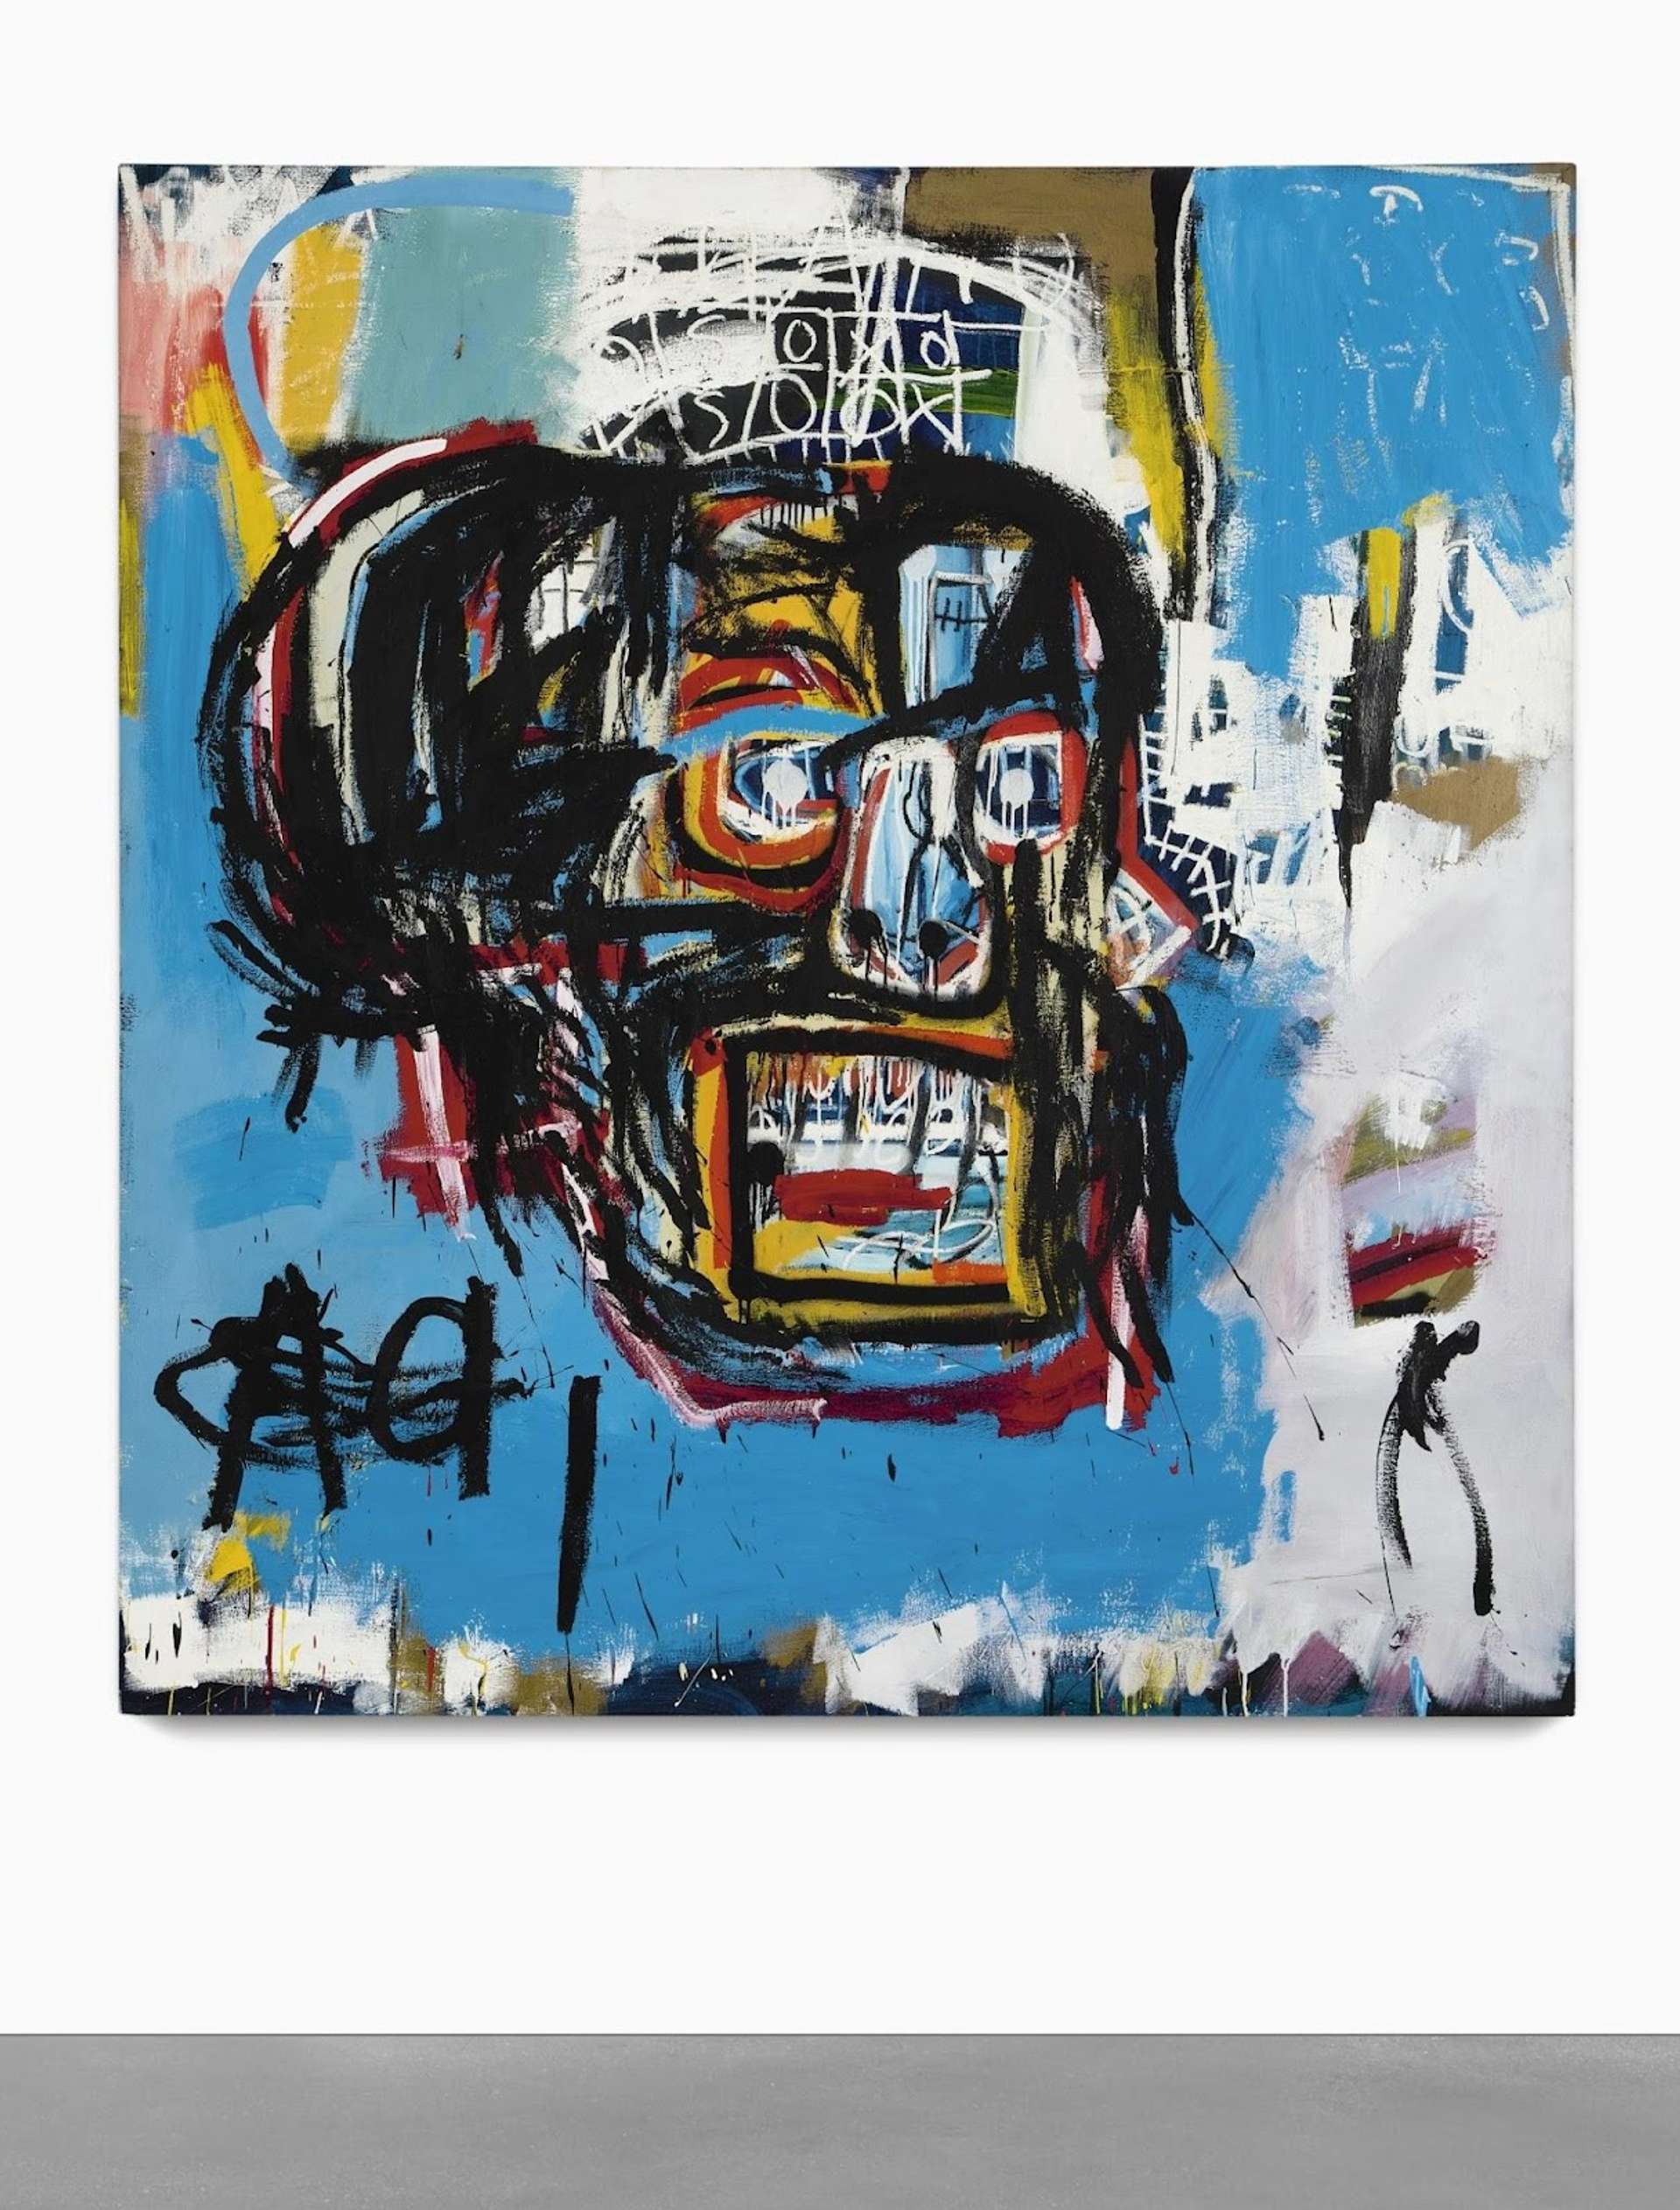 An image of the artwork Untitled by Basquiat. It shows a stylised skull, depicted in black, red and yellow against a sky-blue background.